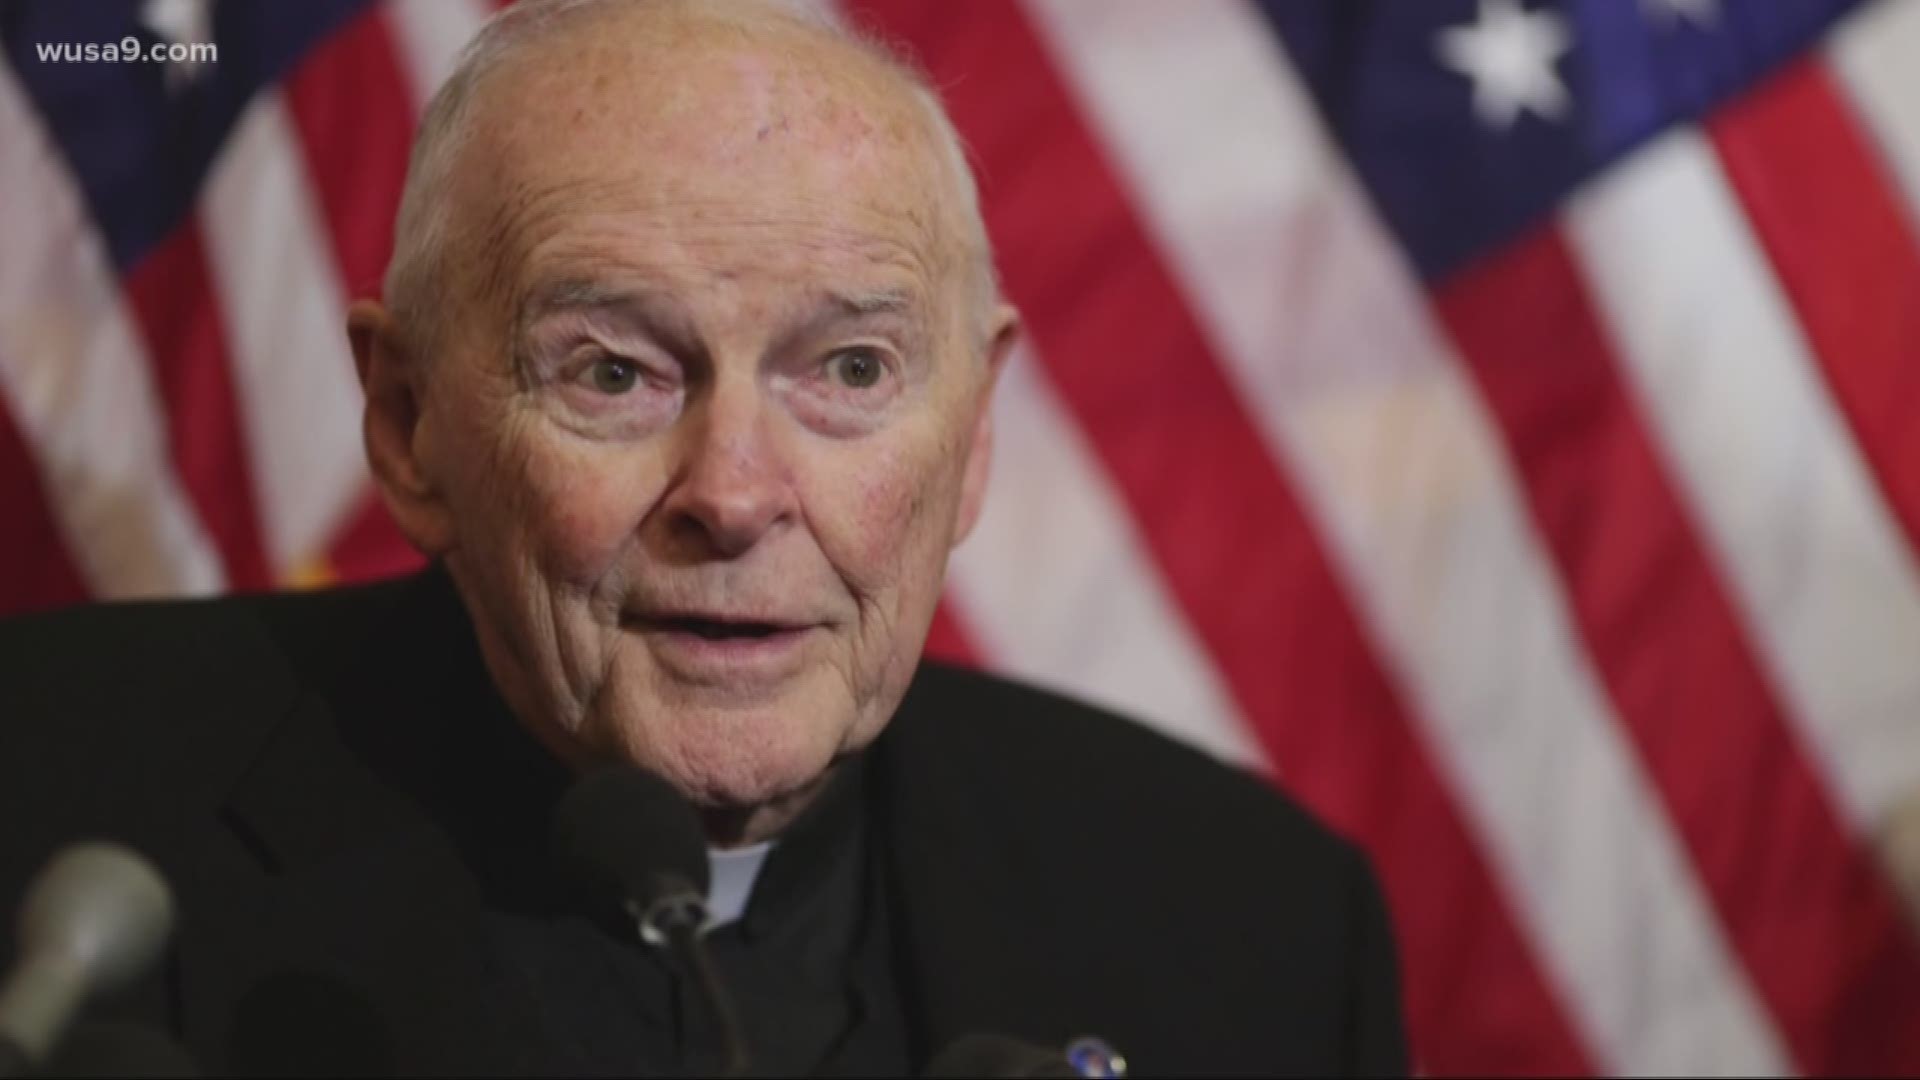 The Vatican made the announcement after finding Theodore McCarrick guilty of sex abuse, including with minors.